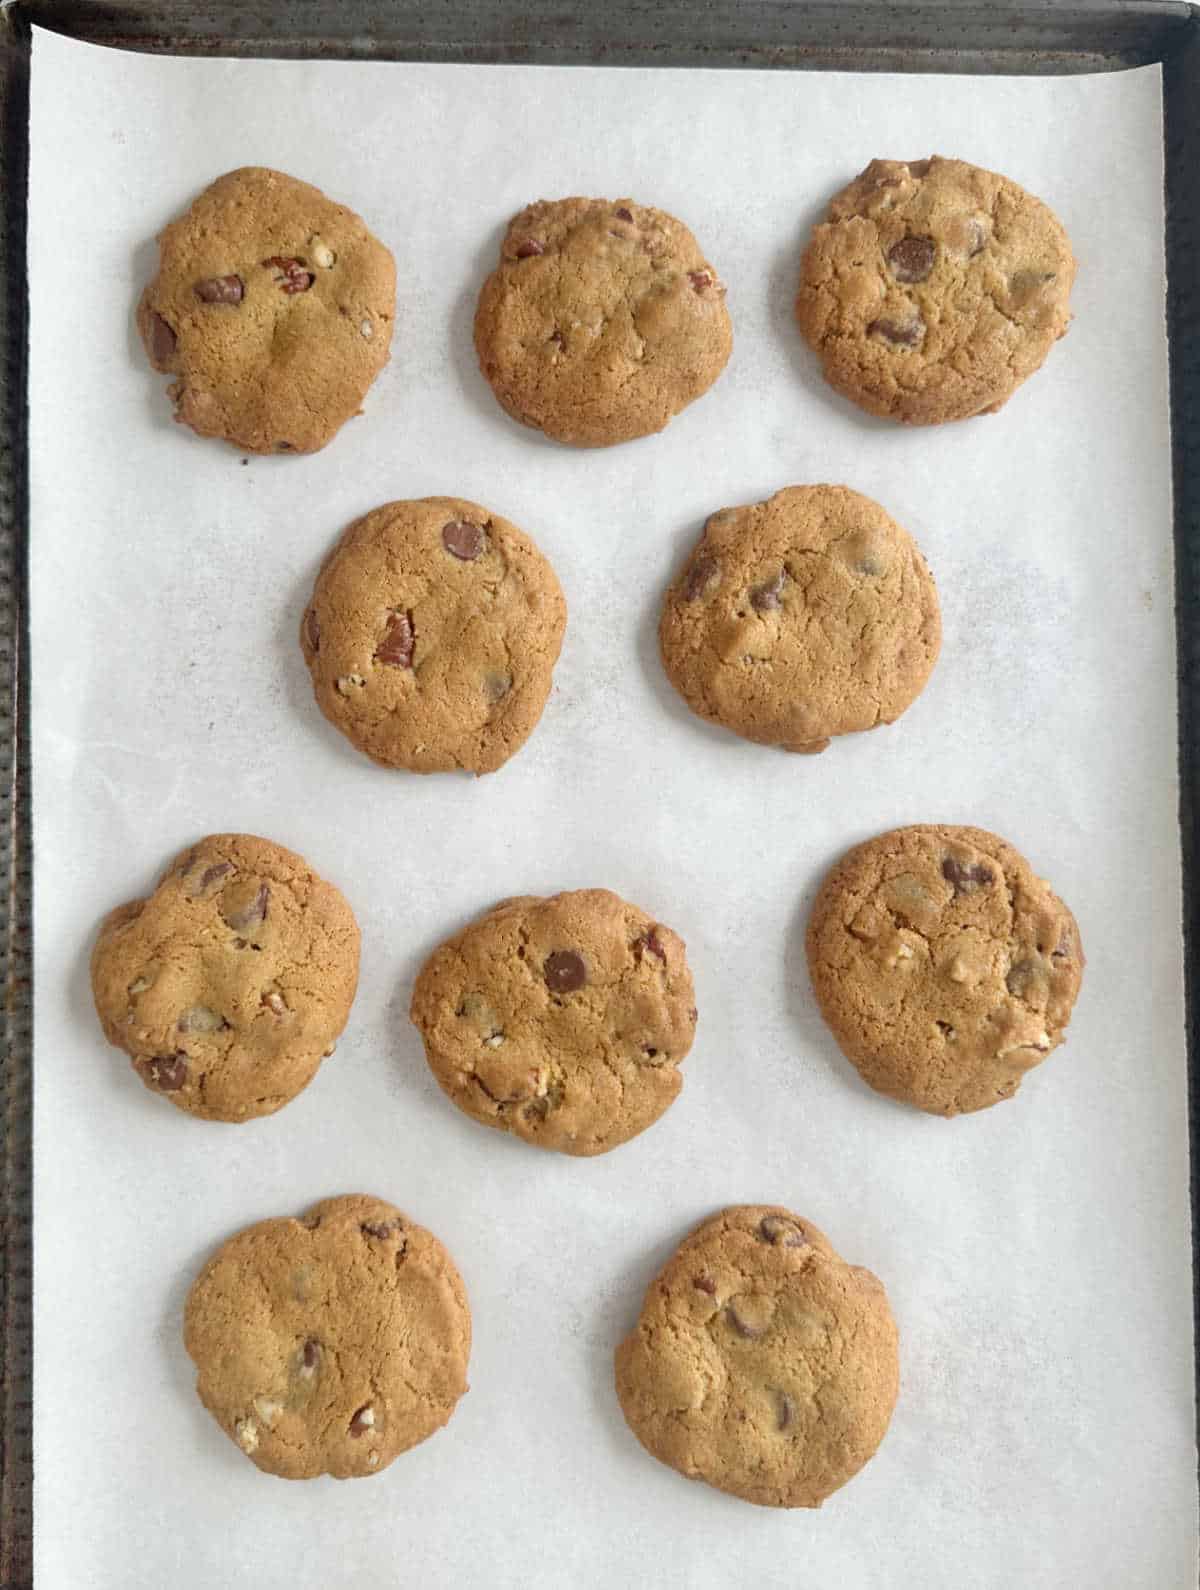 Baked chocolate chip pecan cookies on parchment paper.